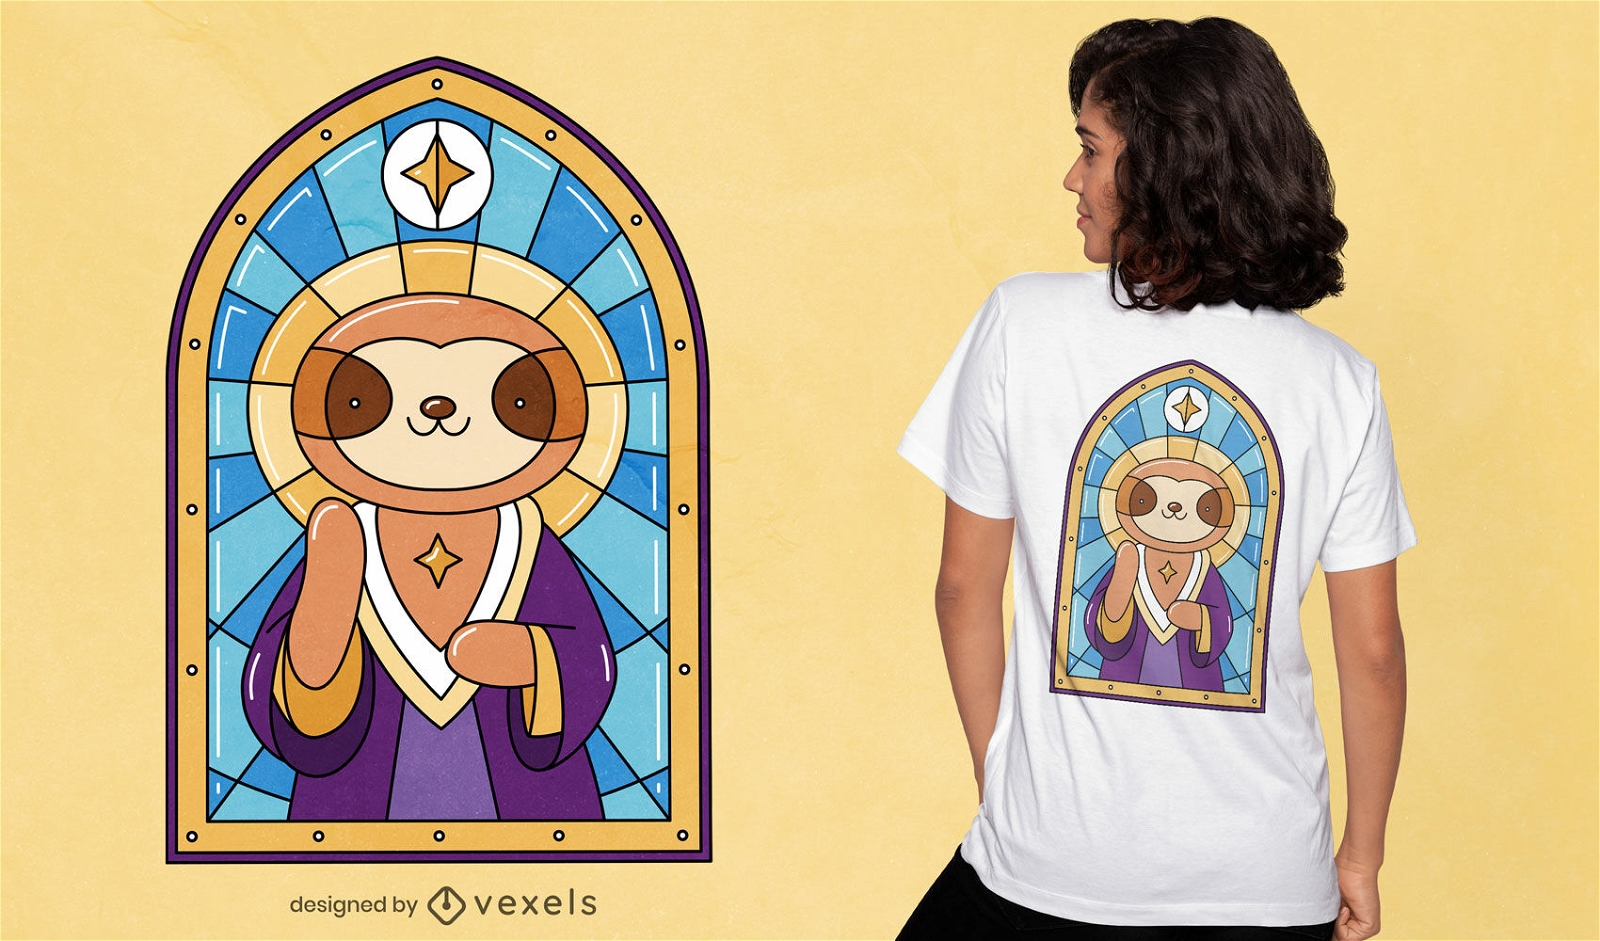 Sloth church stained glass t-shirt design